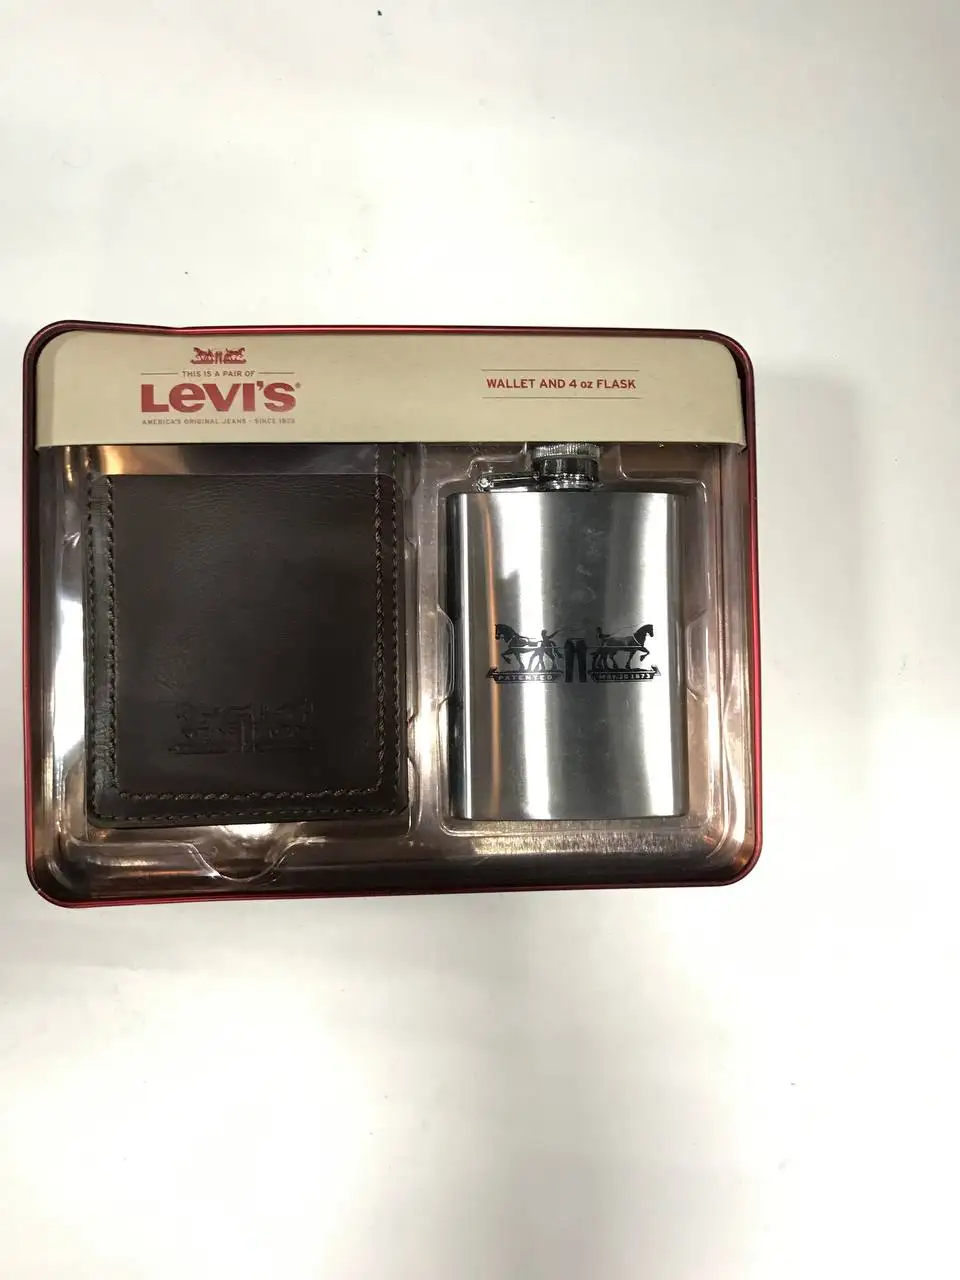 Levi's Wallet And 4 Oz Flask Purse - Wallets - AliExpress